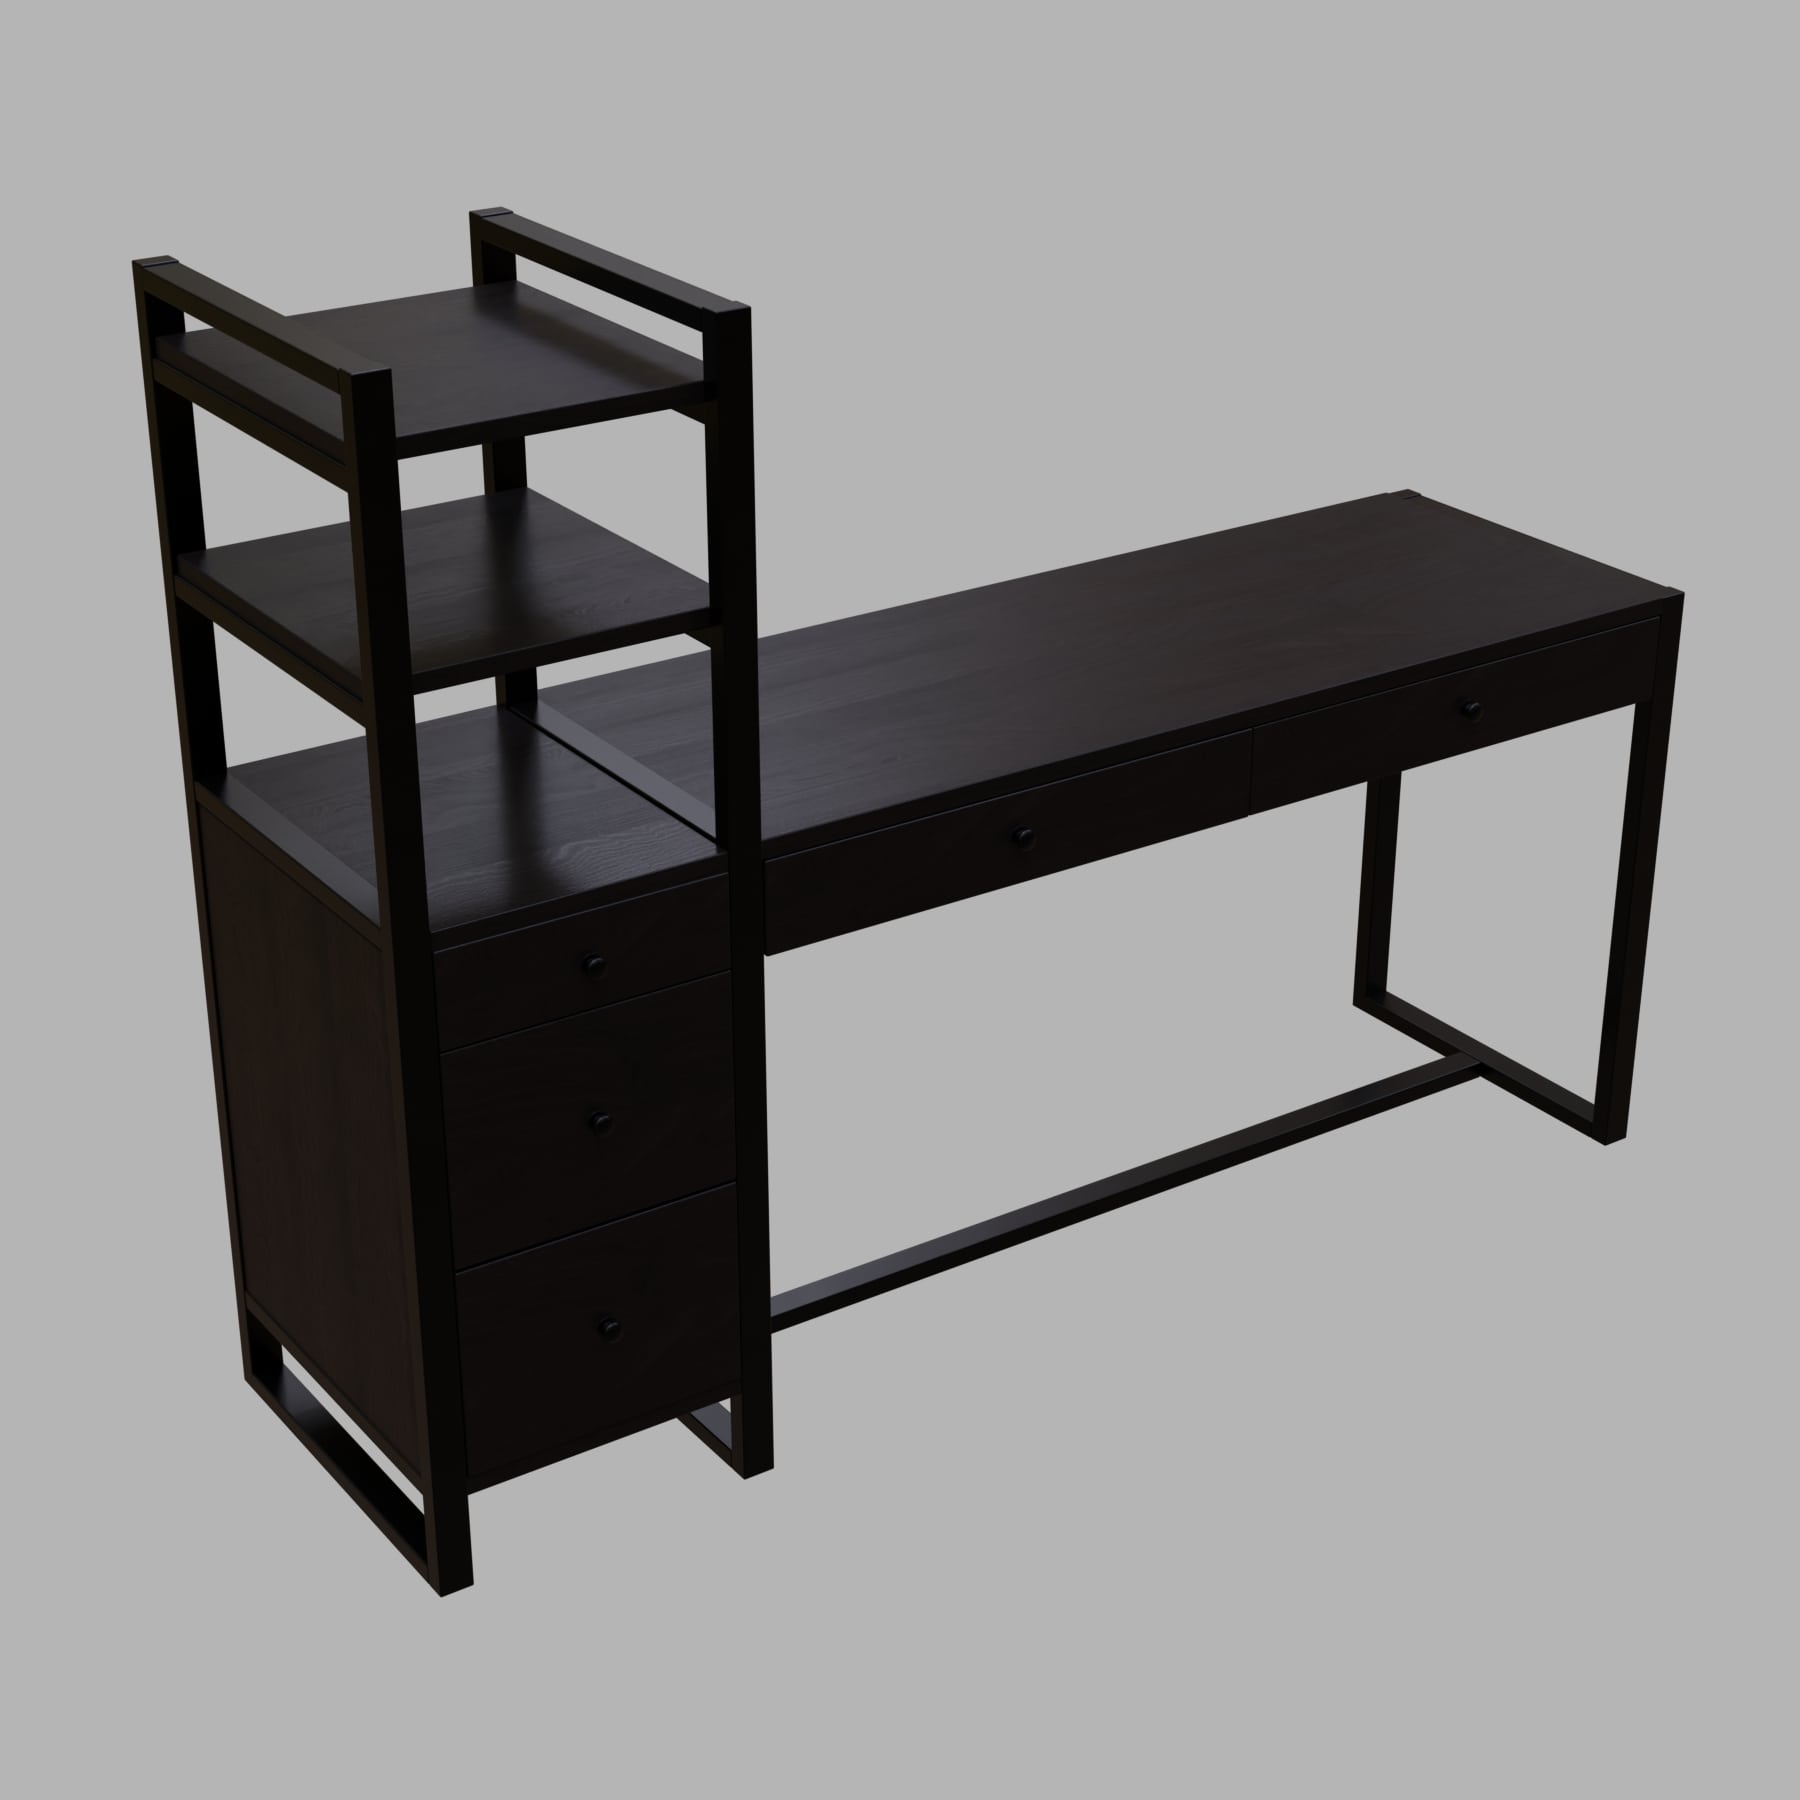 Rubi Study Table with drawers & storage shelves in brown finish